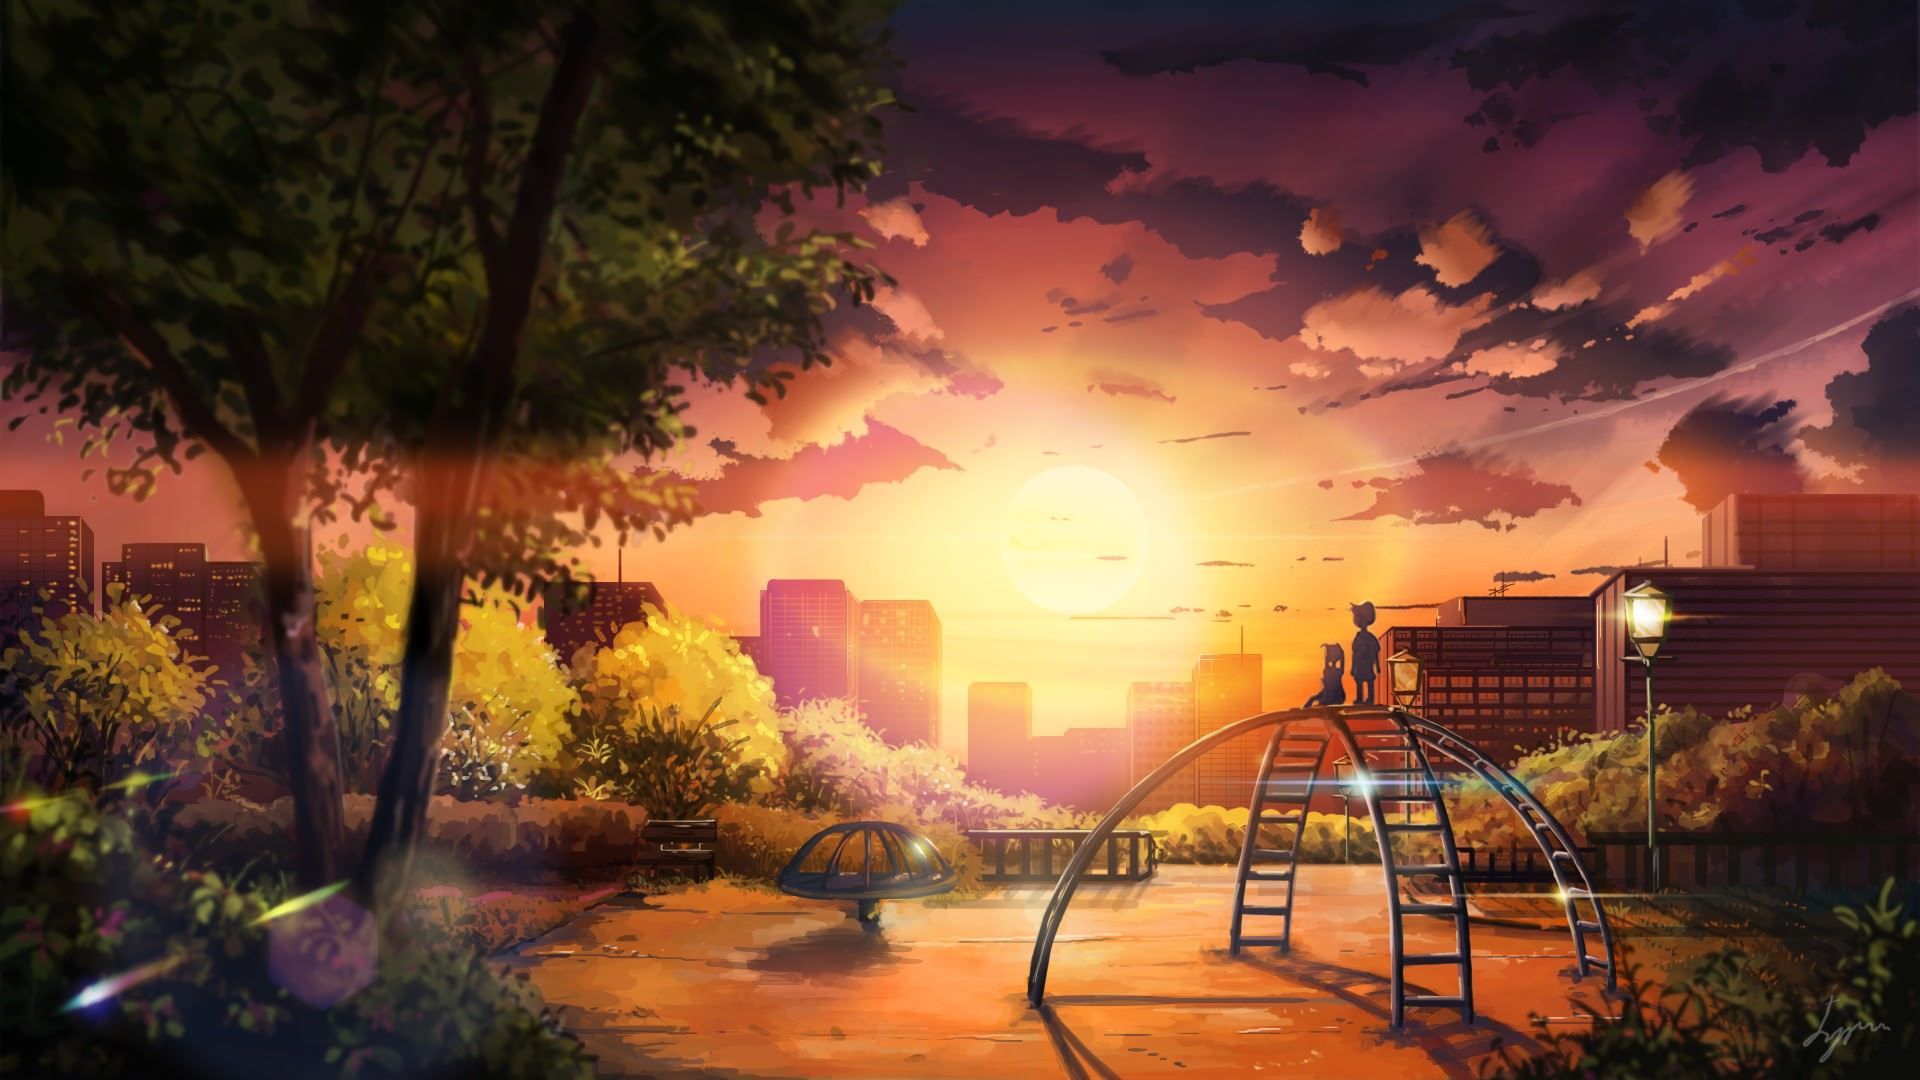 Anime Background Images Browse 124151 Stock Photos  Vectors Free  Download with Trial  Shutterstock